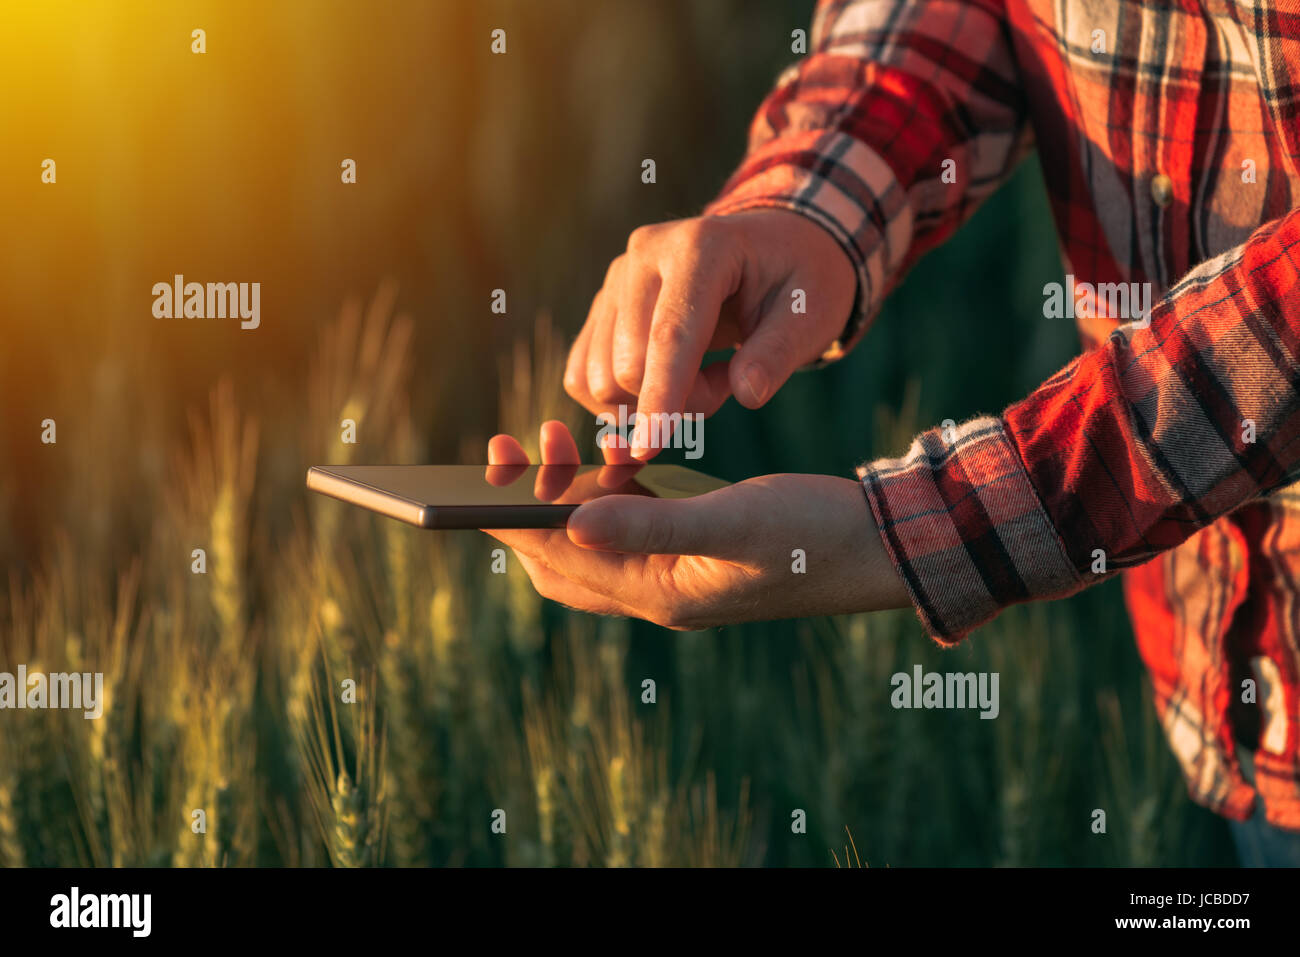 Agronomist using smart phone mobile app to analyze crop development, female hands with mobile phone in cultivated wheat field Stock Photo